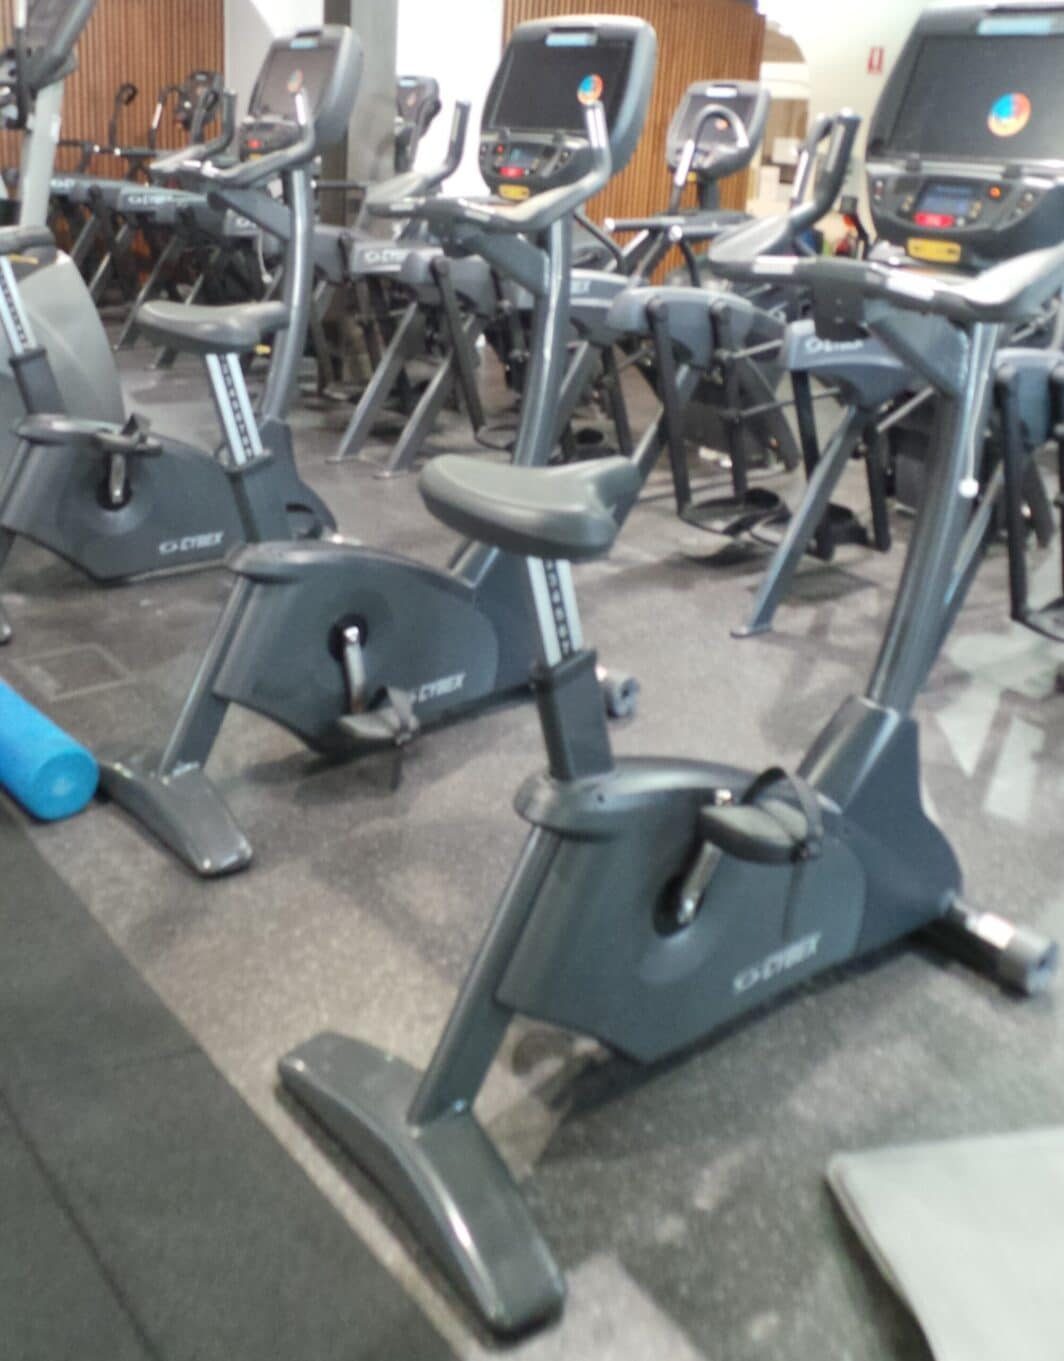 Cybex 770C Upright Bike 2nd hand commercial gym equipment for sale